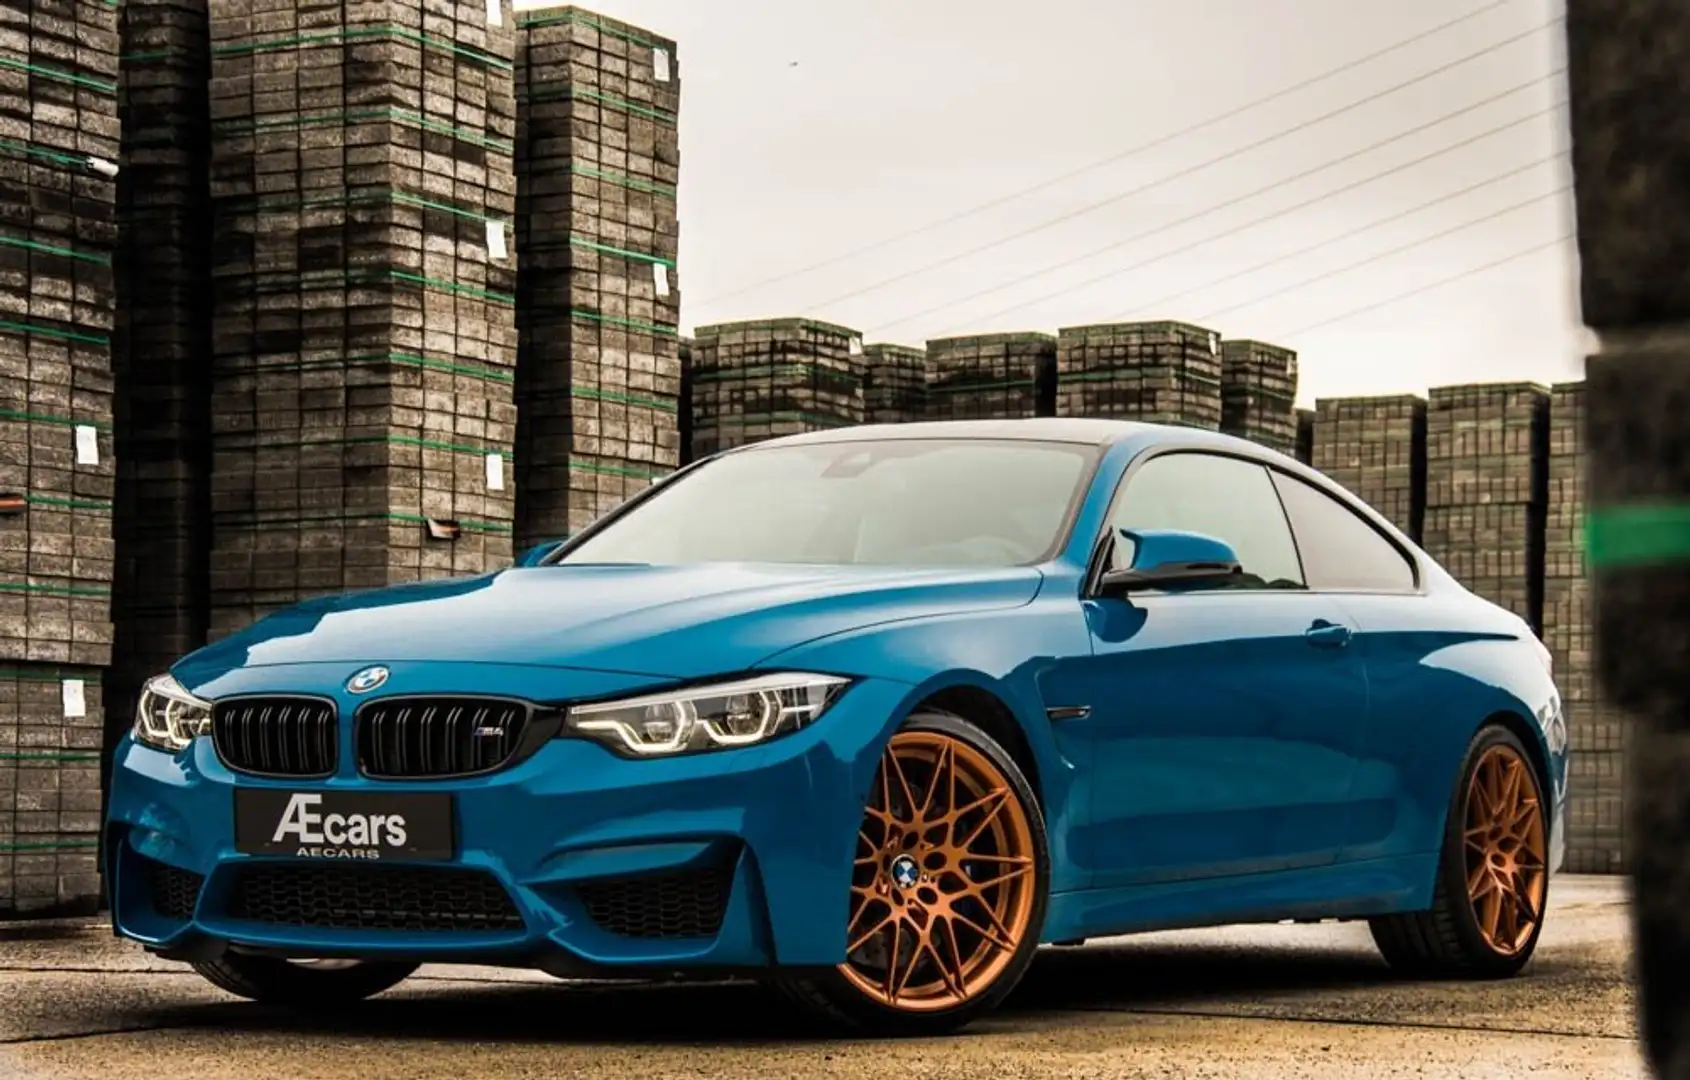 BMW M4 *** COMPETITION HERITAGE / LIMITED 1 OF 750 *** Mavi - 1